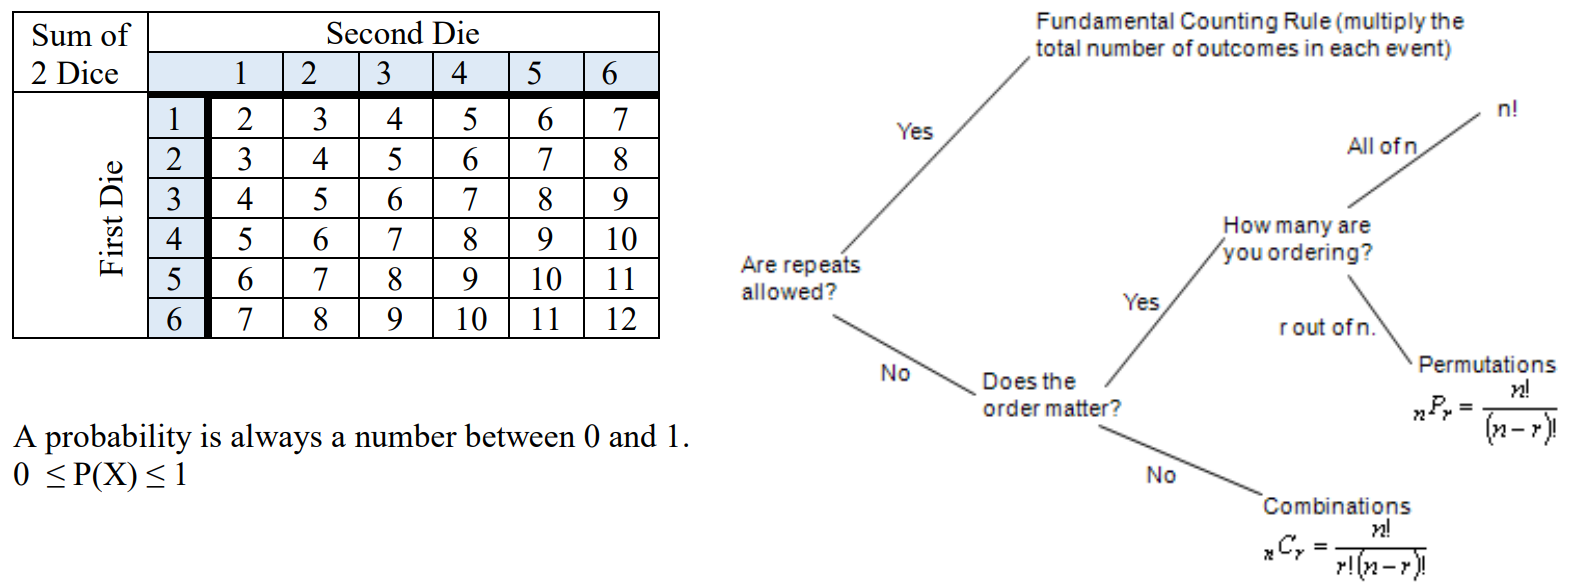 Table of sums of the rolls of two 6-sided dice. Logic tree for determining whether to apply the Fundamental Counting Rule, factorials, permutations, or combinations to a situation.